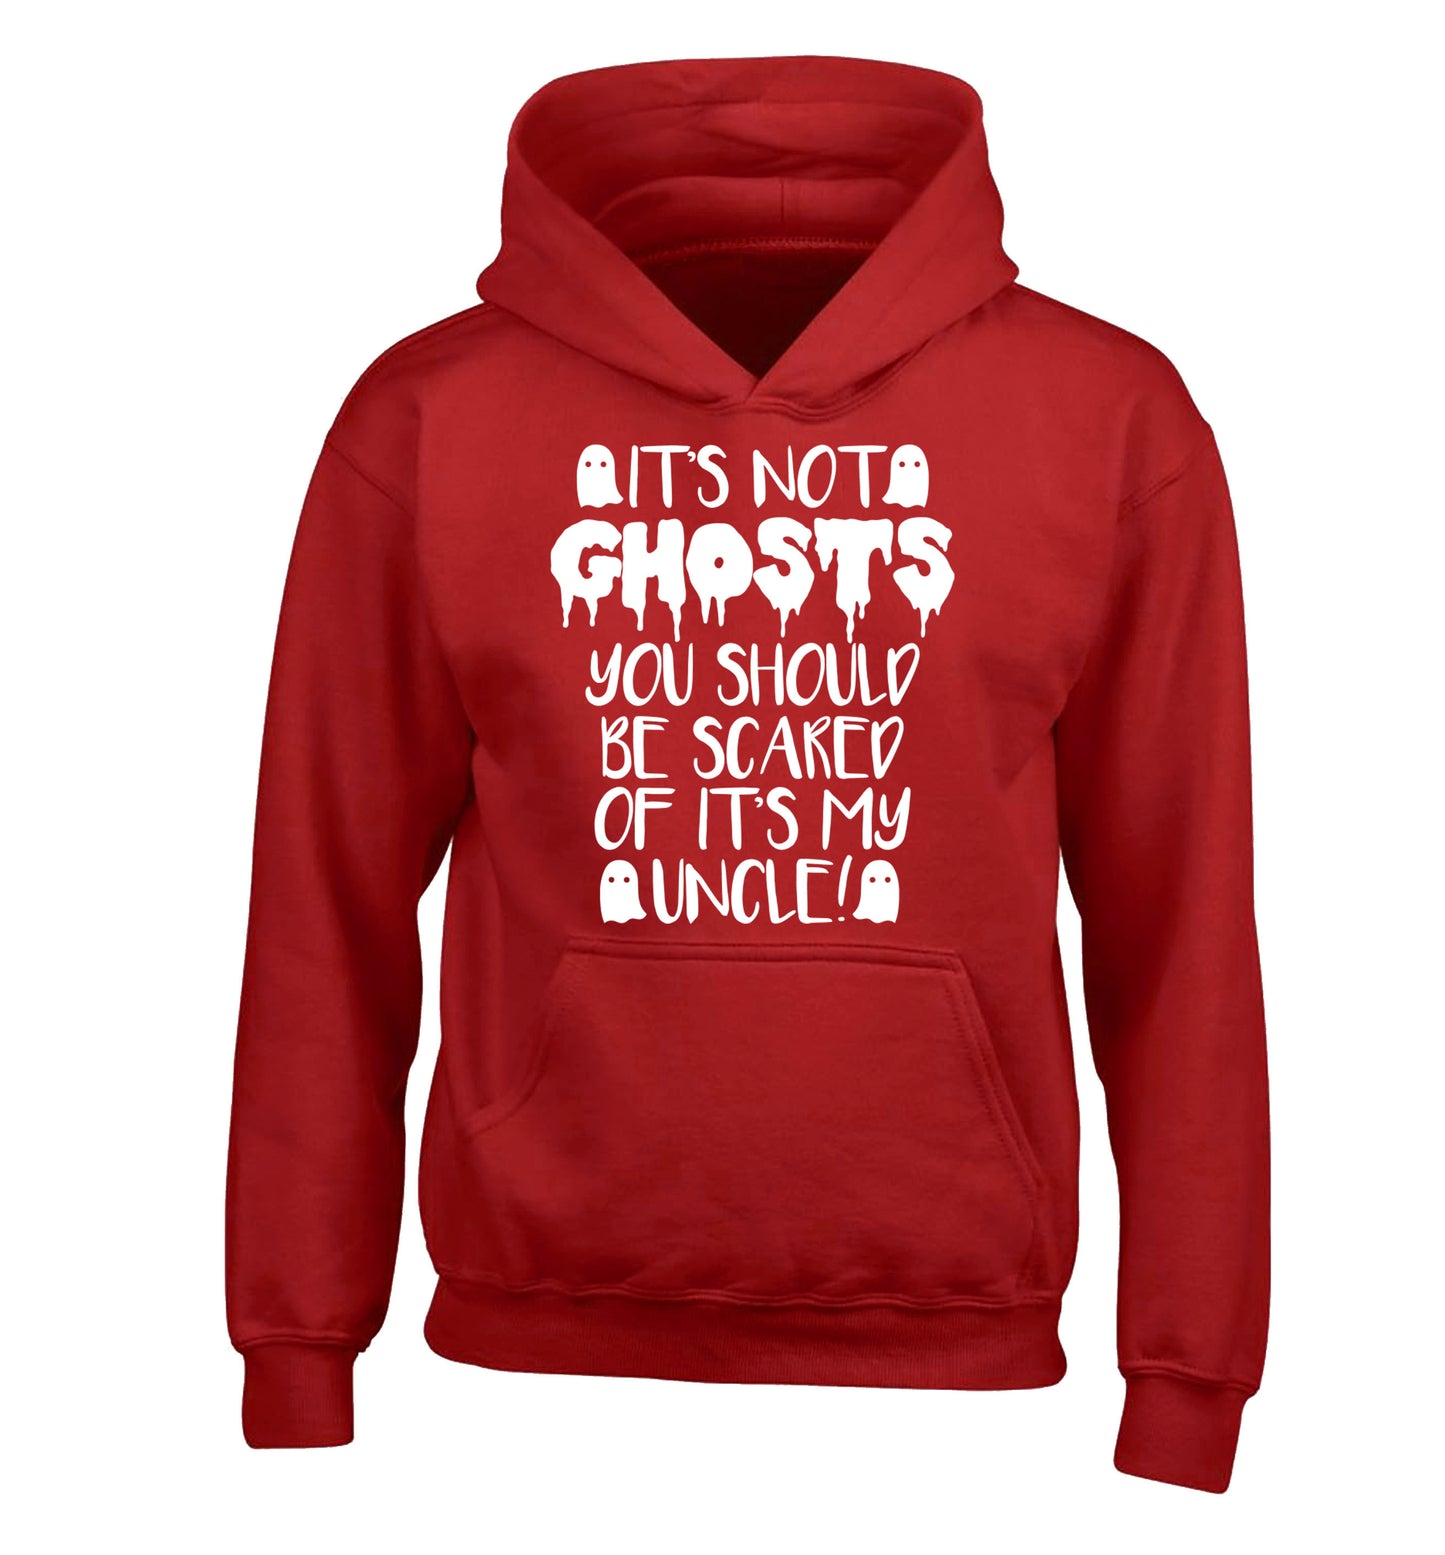 It's not ghosts you should be scared of it's my uncle! children's red hoodie 12-14 Years